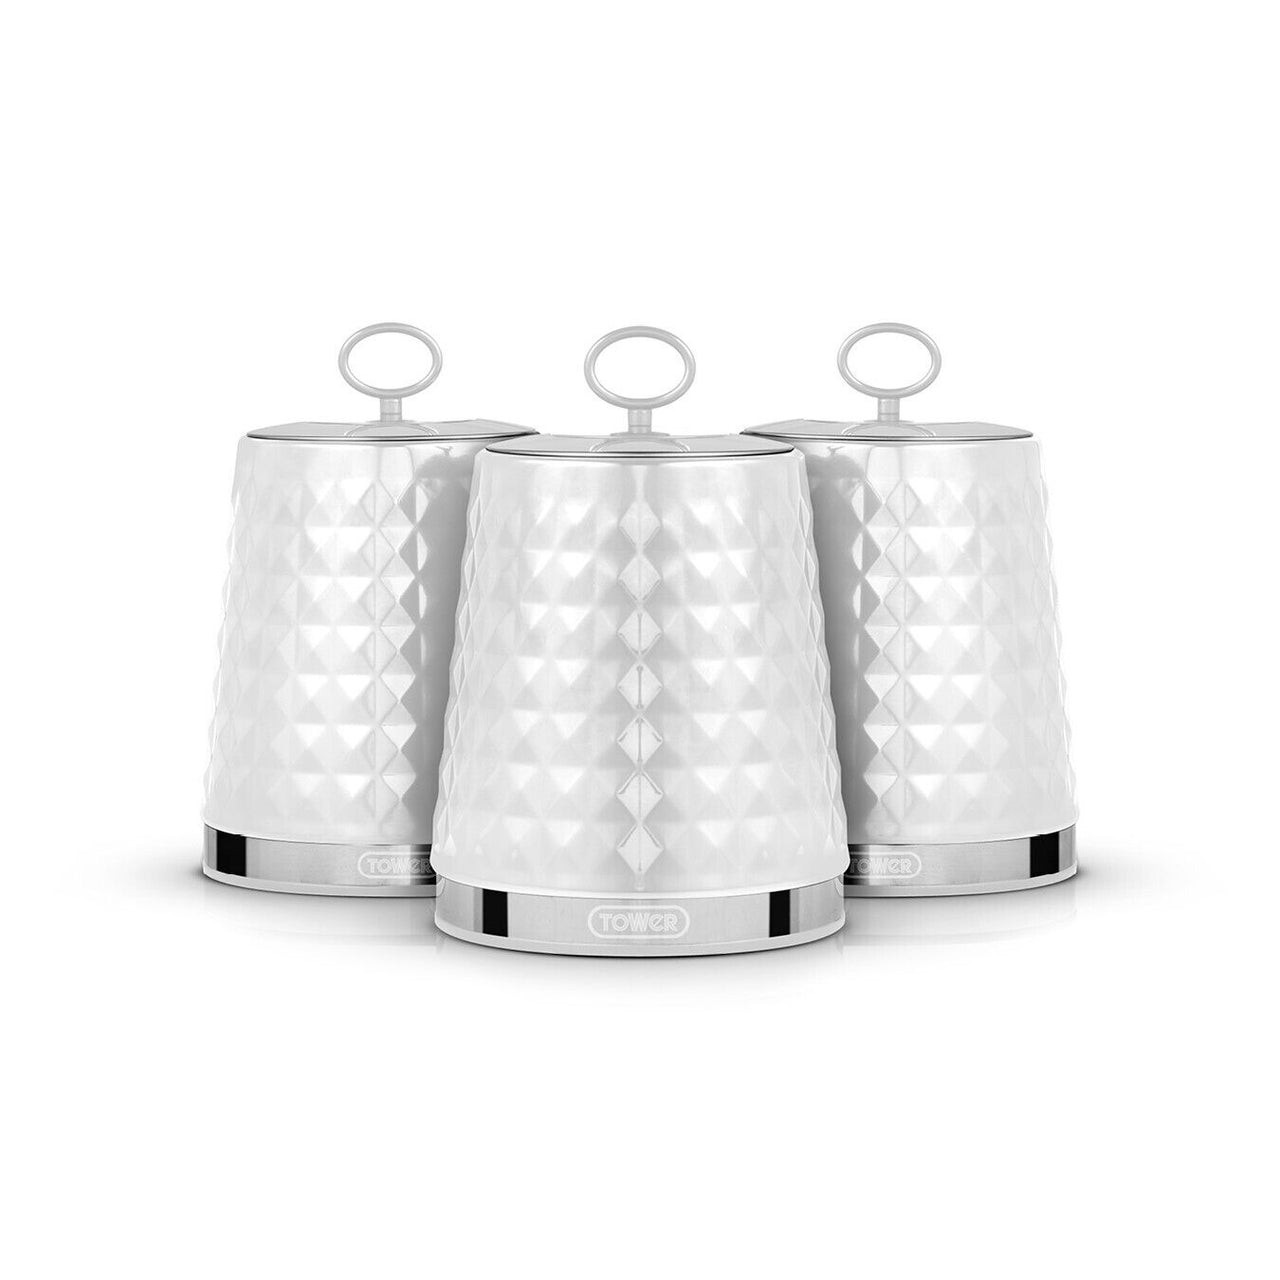 Tower Solitaire White Set of 3 Canisters Kitchen Storage T826207WHT